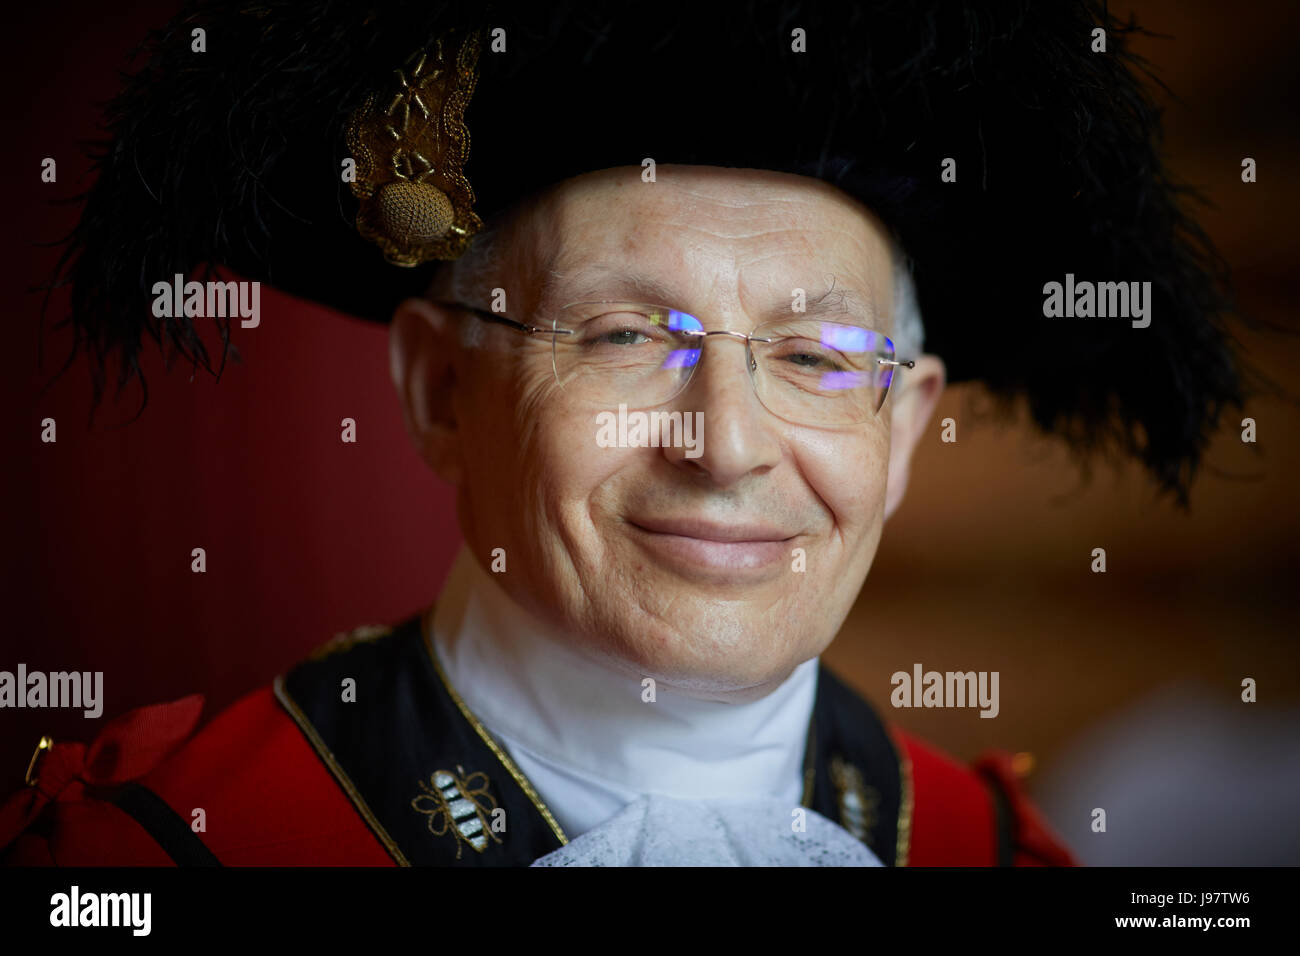 Lord Mayor of Manchester 2017 - 18 Councillor Eddy Newman in official red robes. Stock Photo